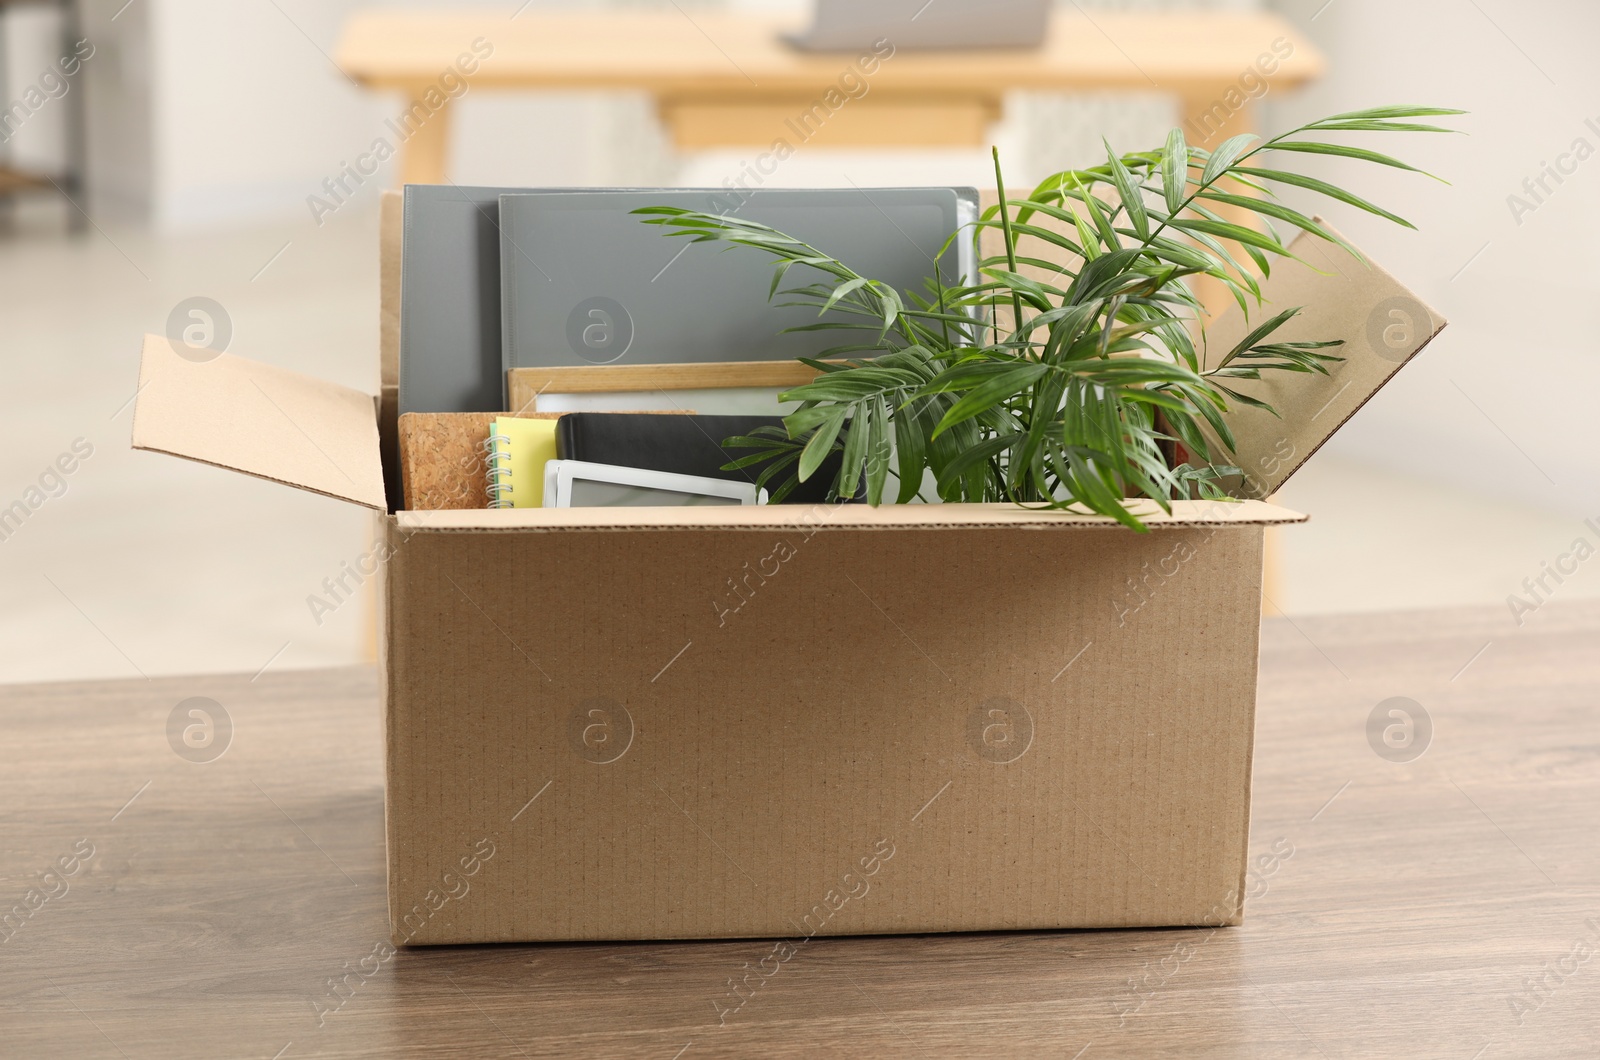 Photo of Unemployment problem. Box with worker's personal belongings on table in office